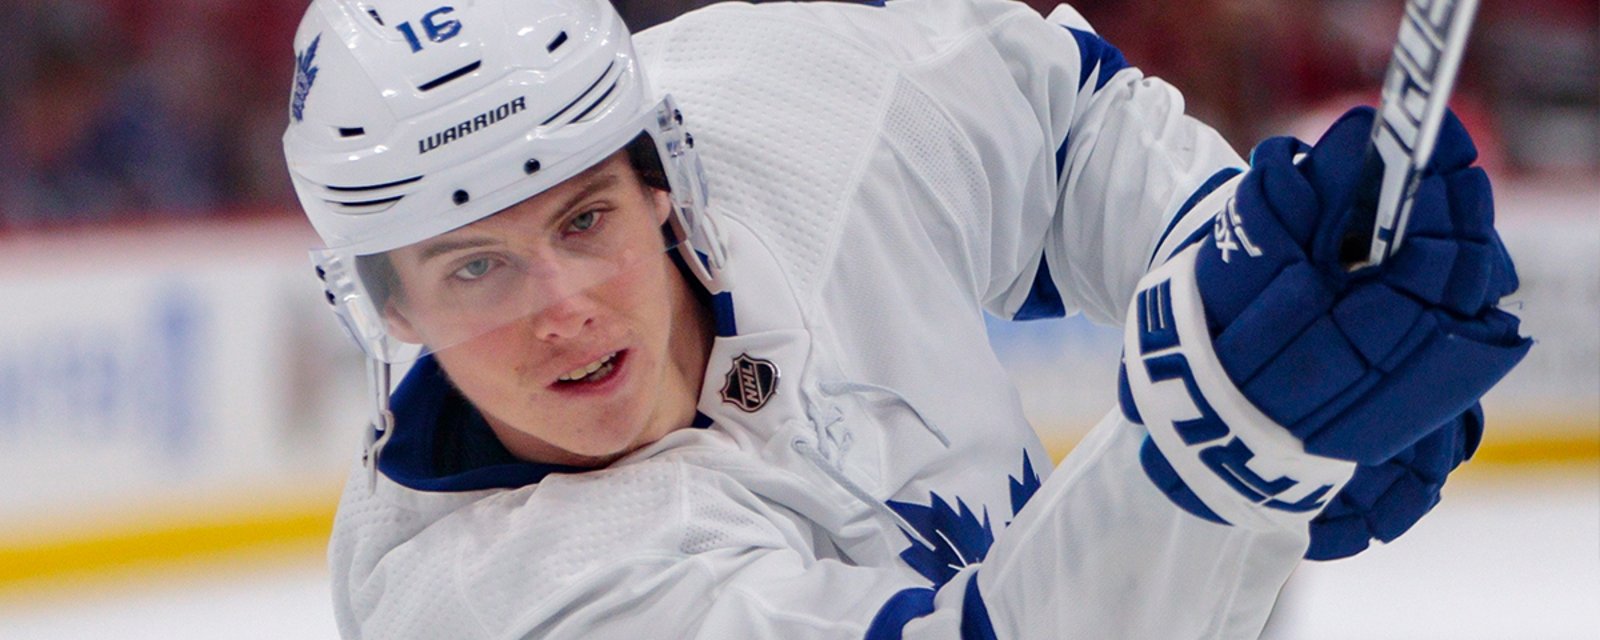 Report: Marner turns down latest big money offer from Leafs